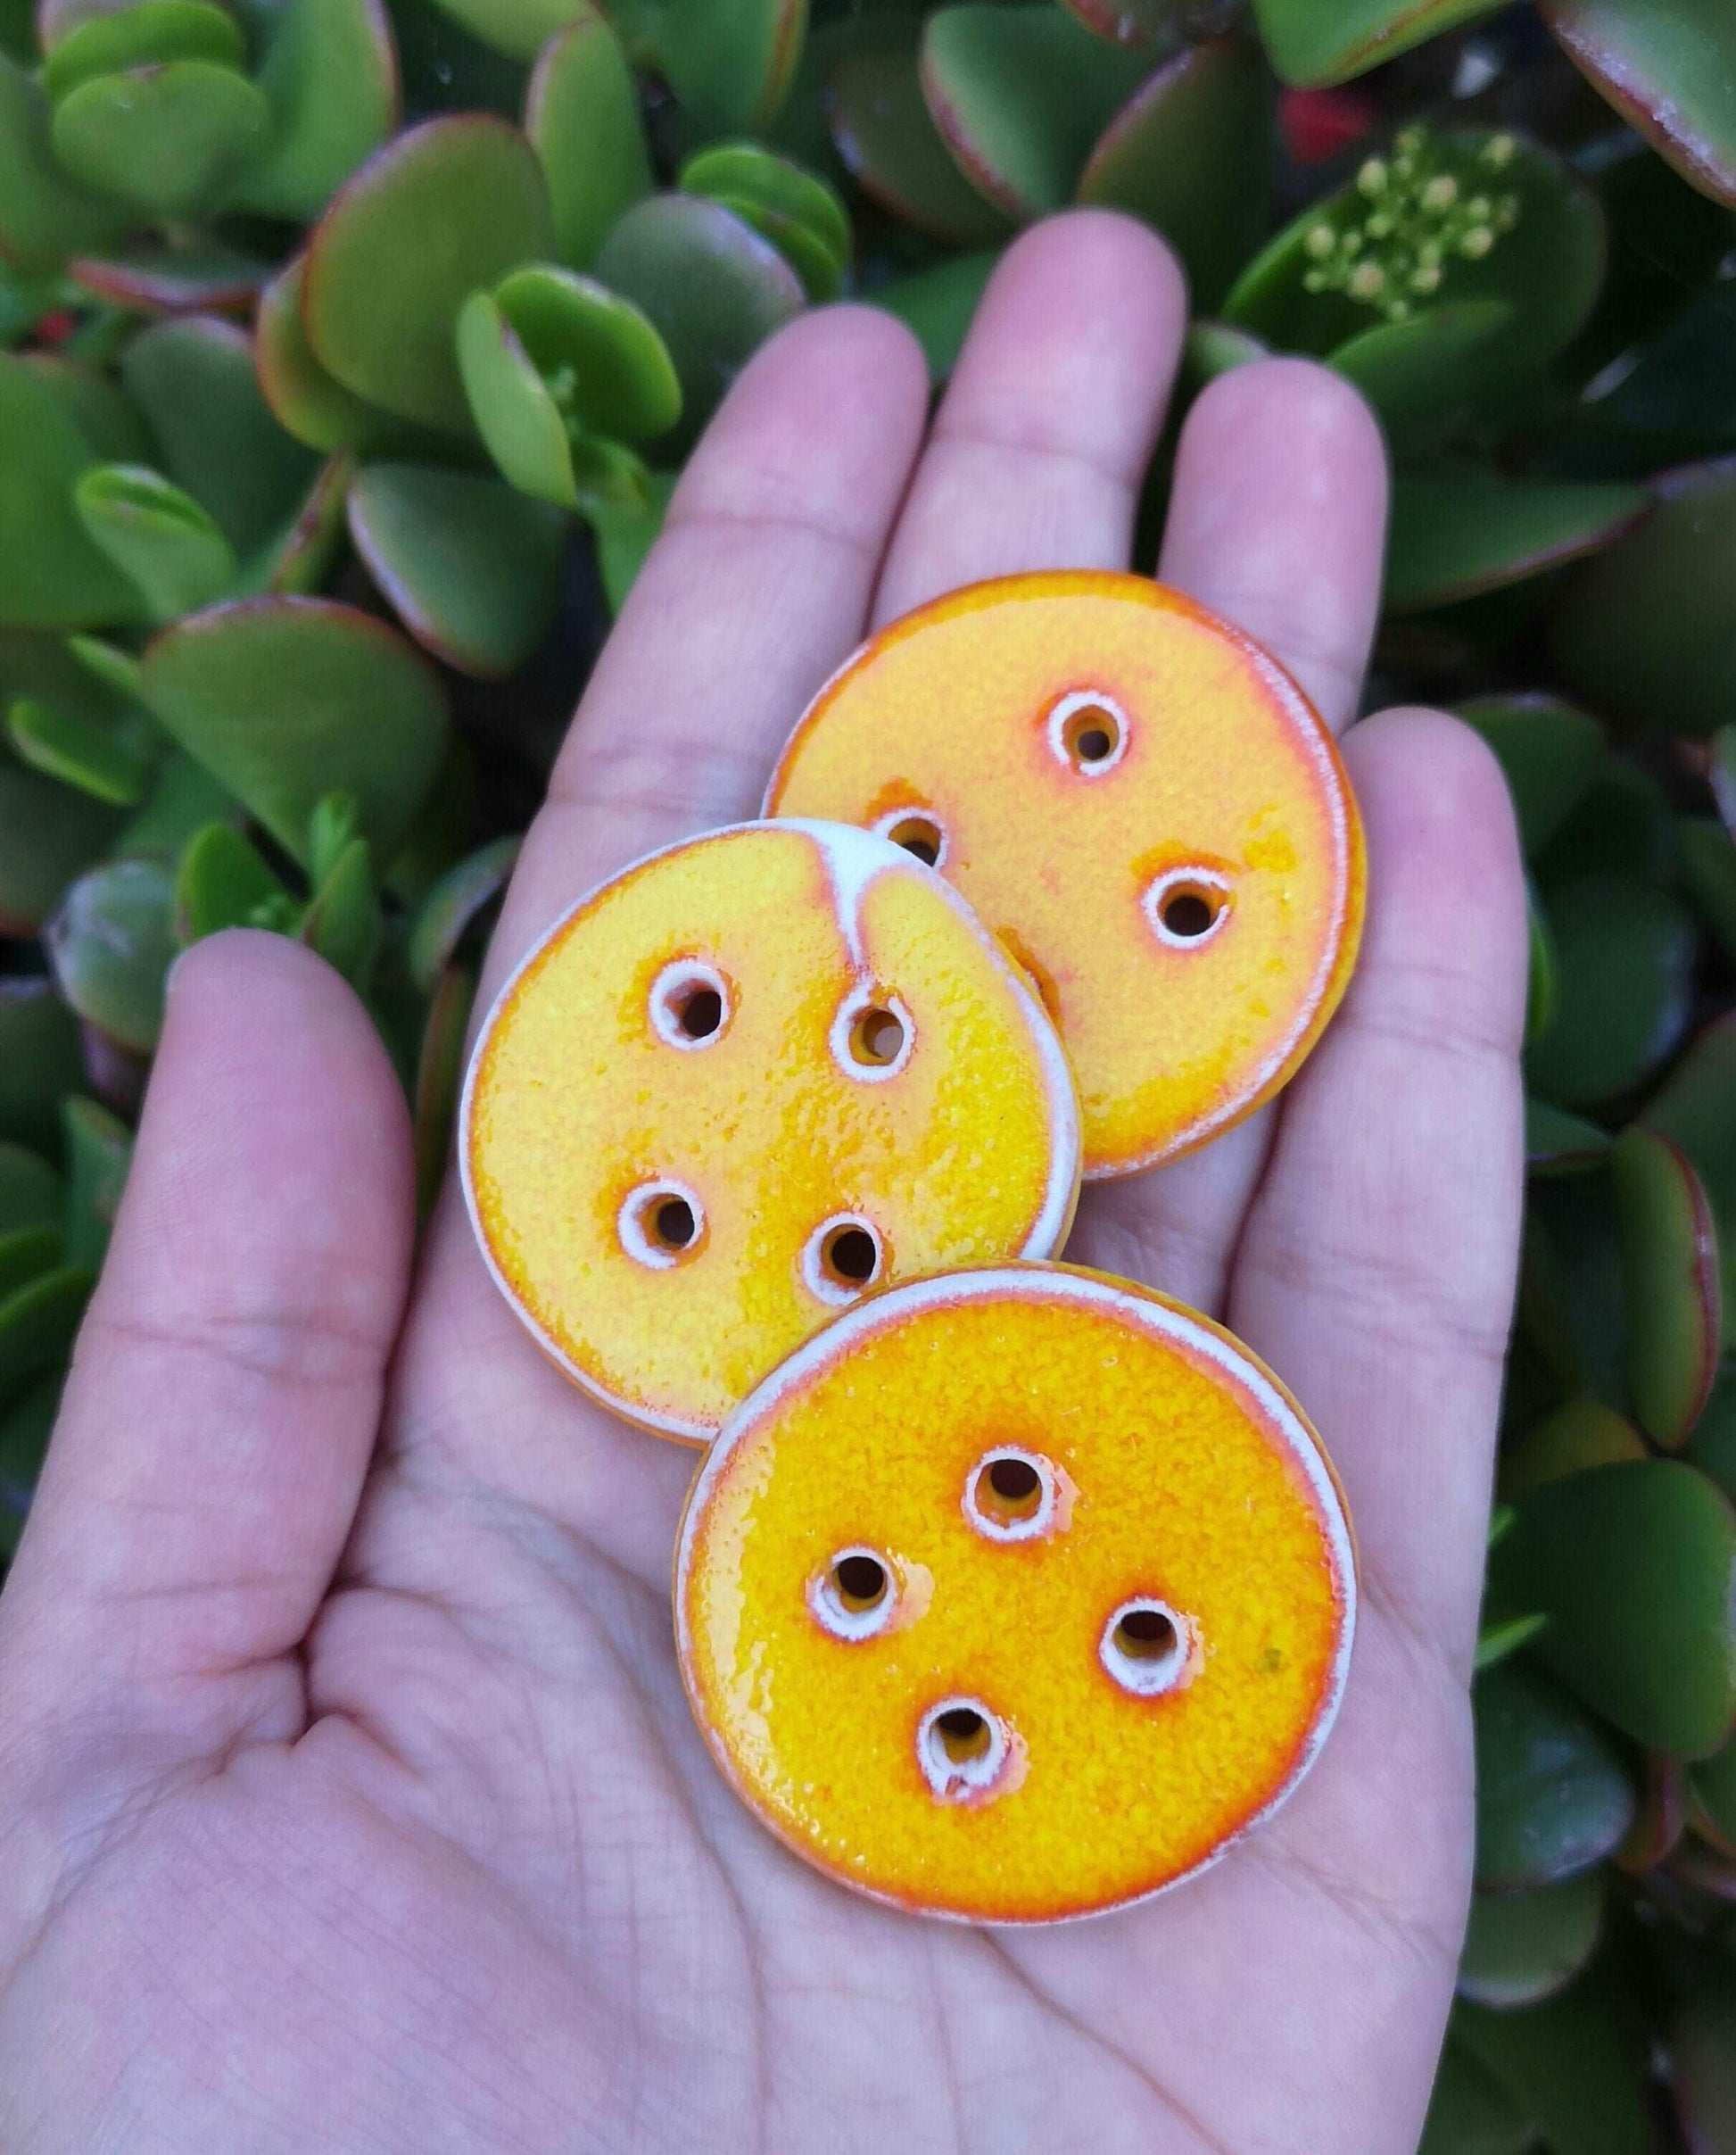 1Pc Extra Large Sewing Buttons Handmade Ceramic Novelty Buttons 40mm, Unique Round Buttons For Coat